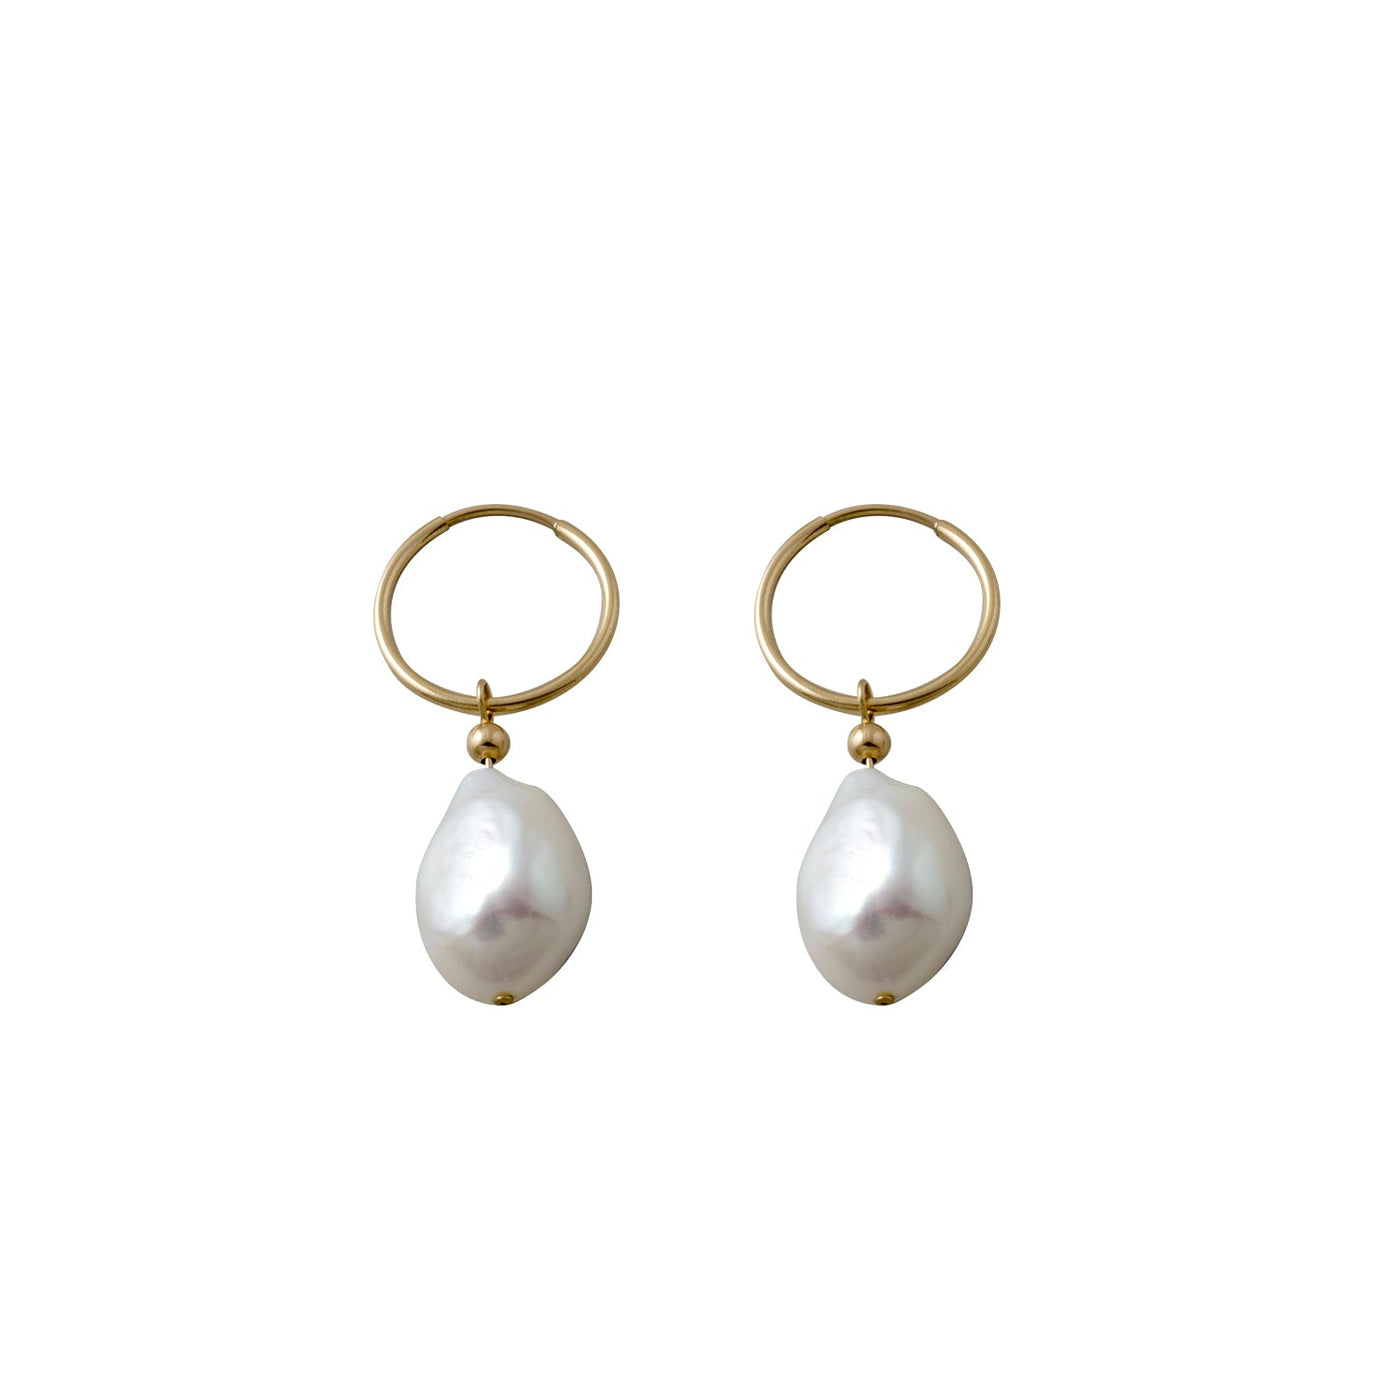 Von Treskow Yellow Gold Hoop Earrings with Baroque Pearl